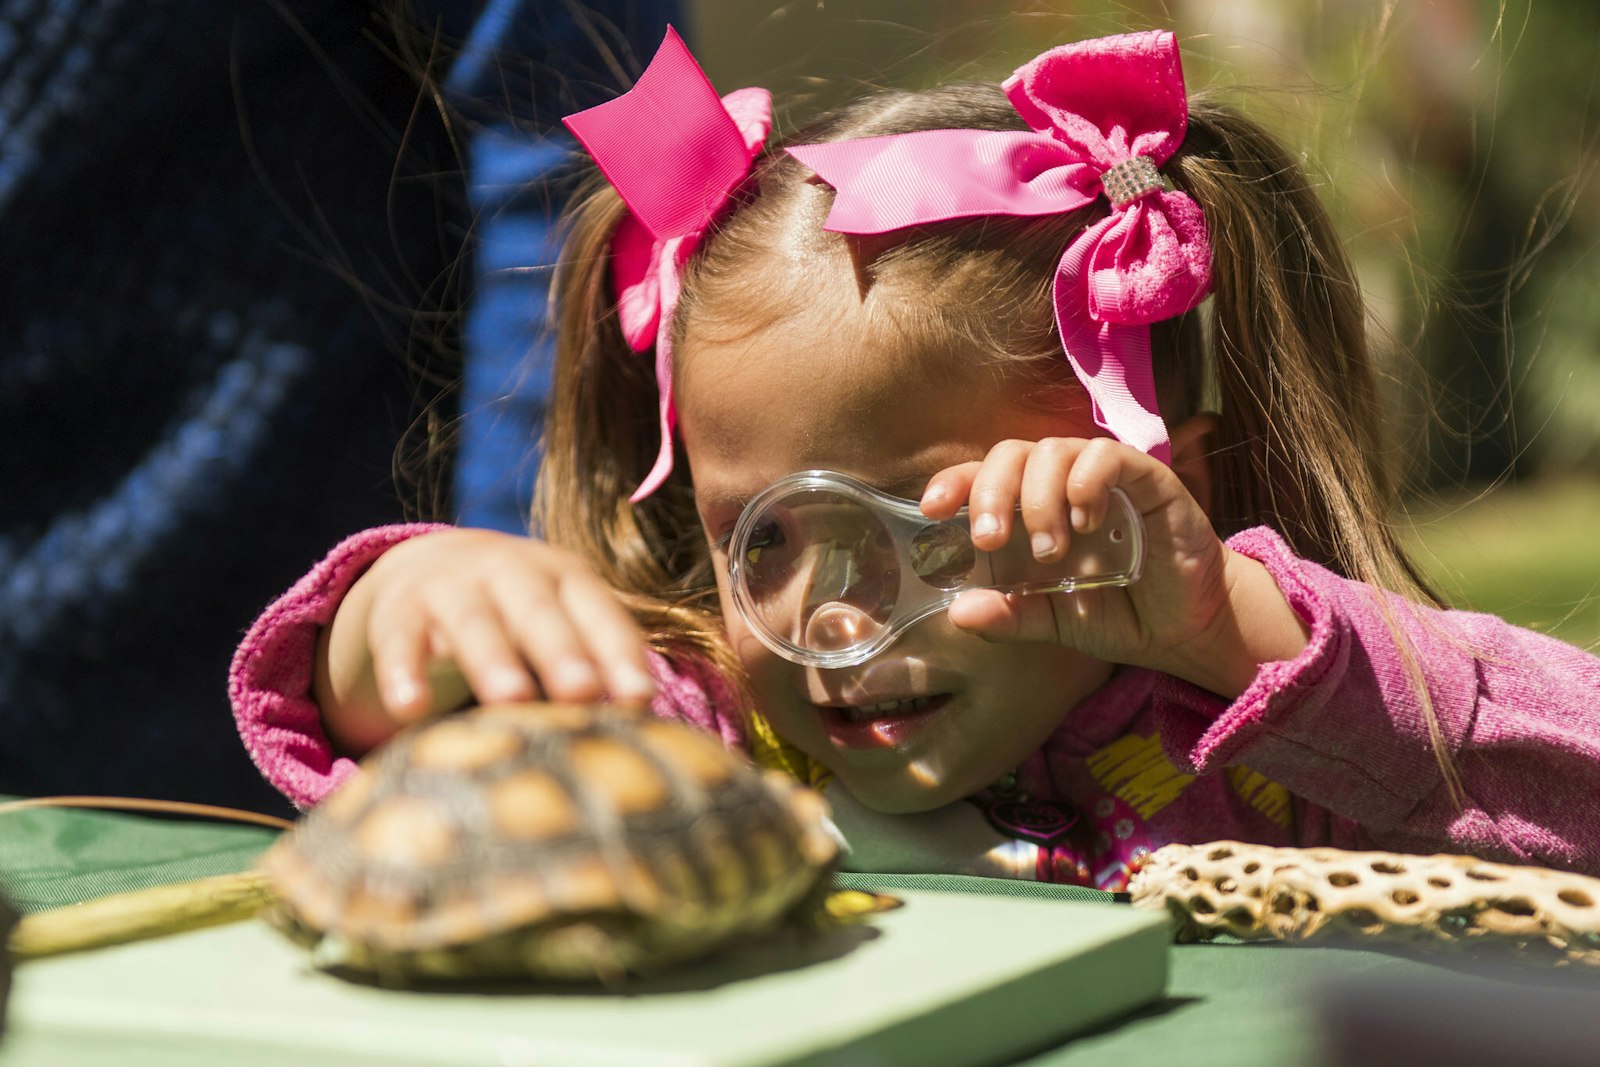 A young girl wearing ribbons in her pigtails uses a magnifying glass to look at a turtle shell